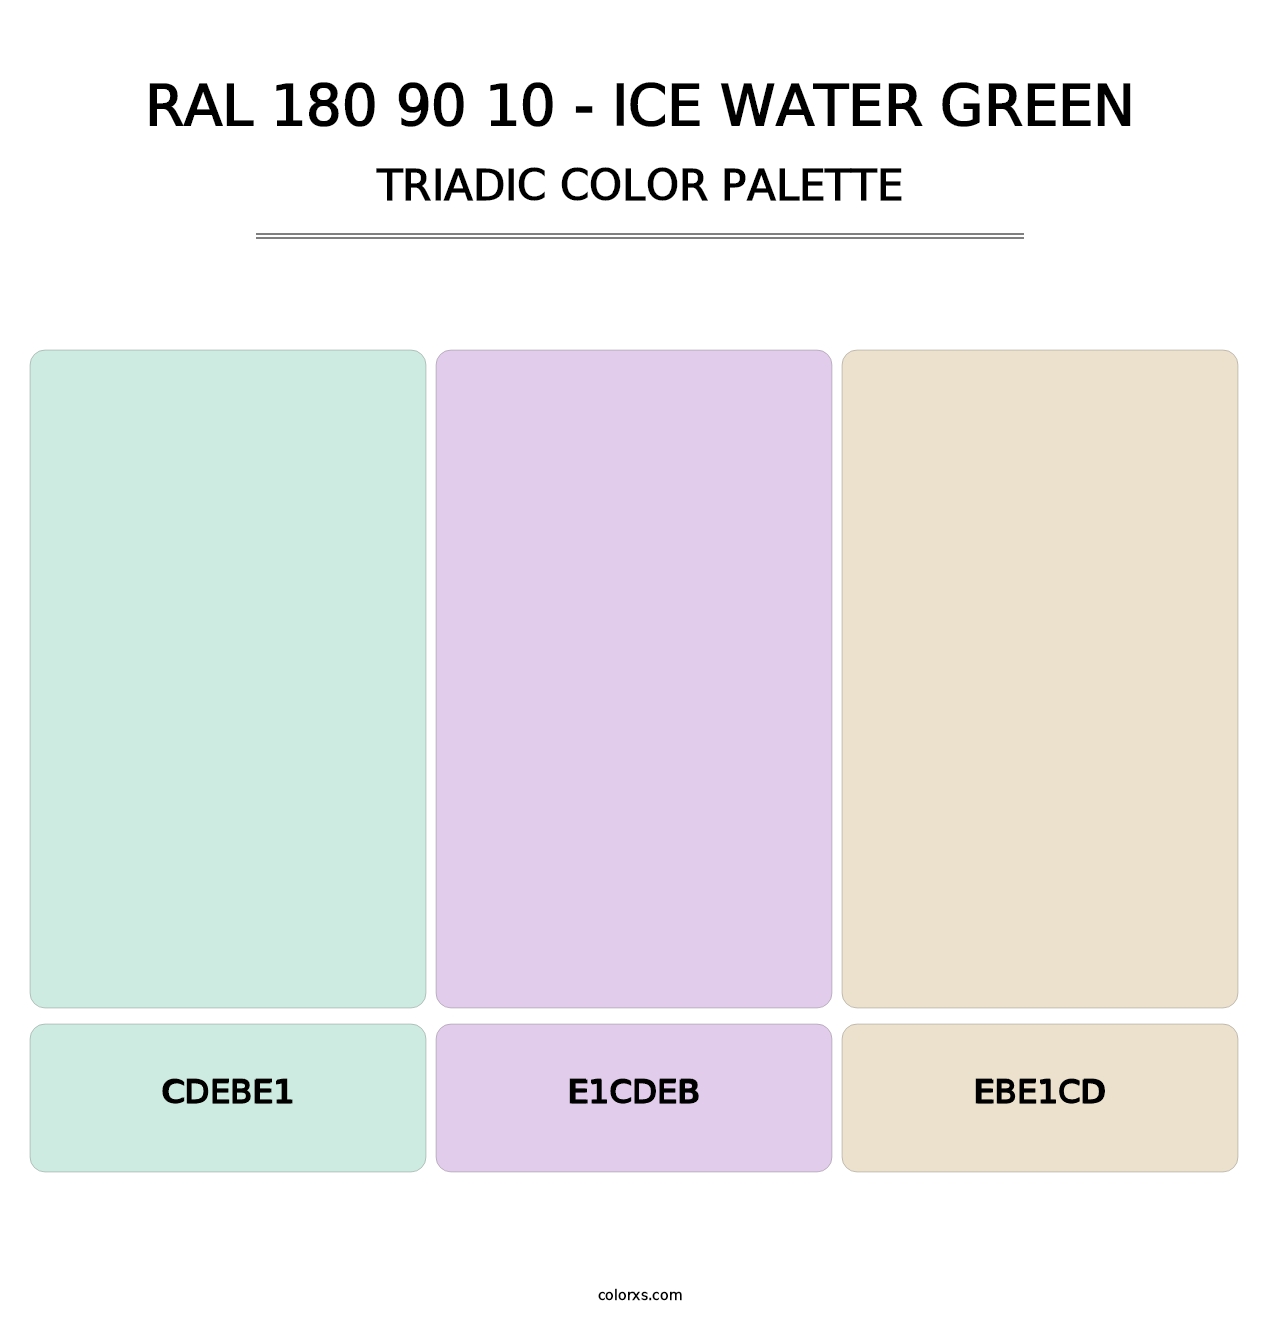 RAL 180 90 10 - Ice Water Green - Triadic Color Palette